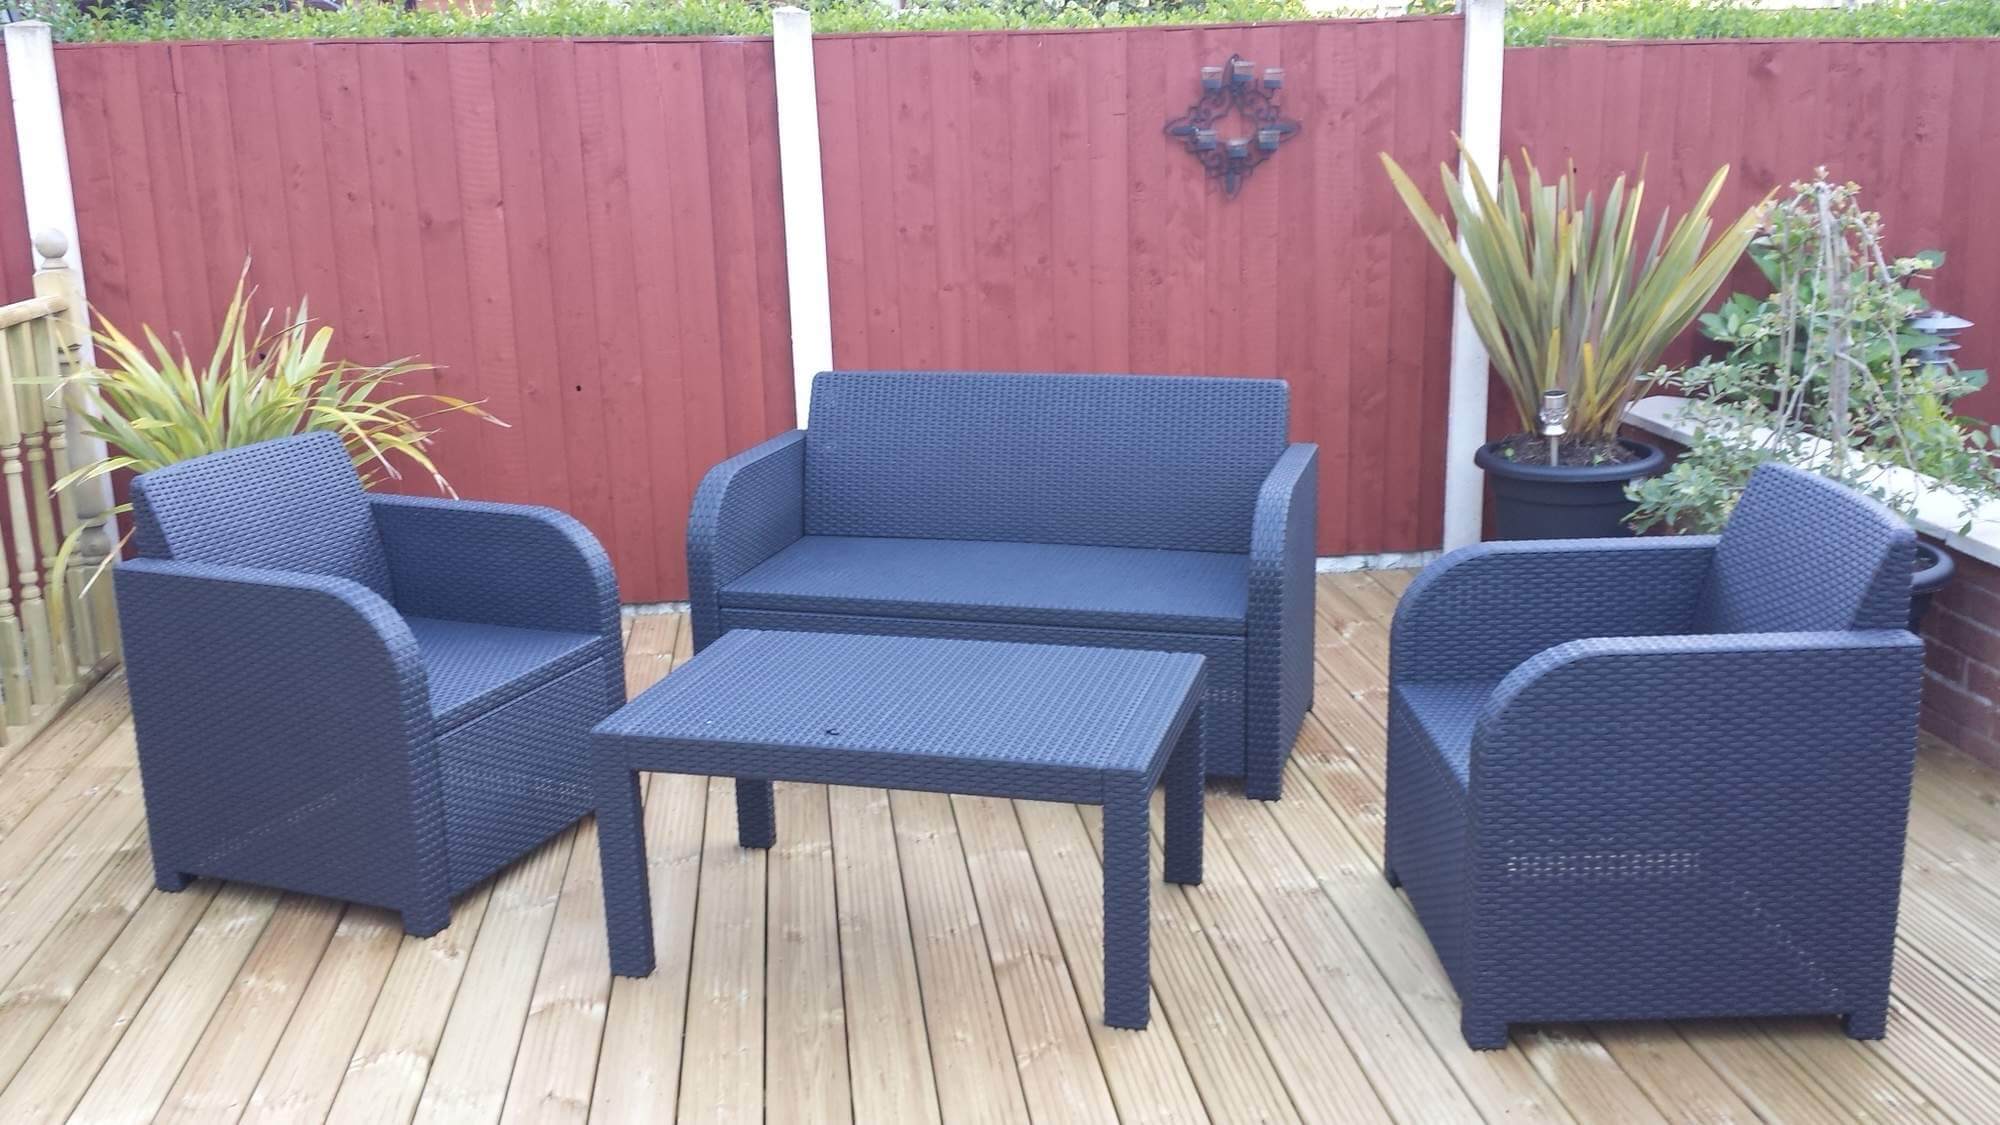 A stylish 4 seater rattan set as seen in The Bailey's Garden